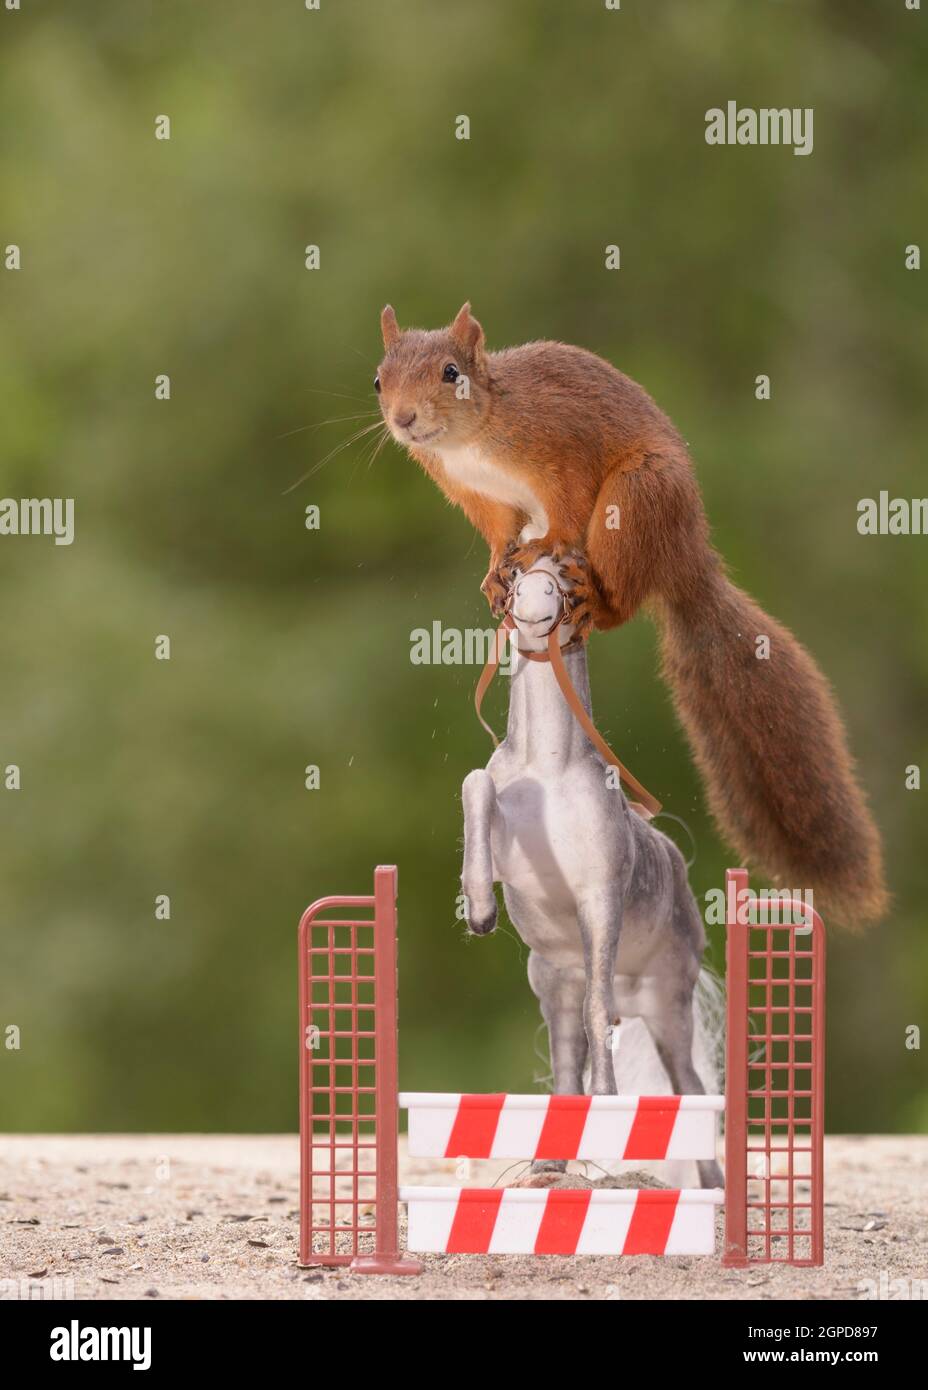 red squirrel standing on head of jumping horse with a hurdle Stock Photo